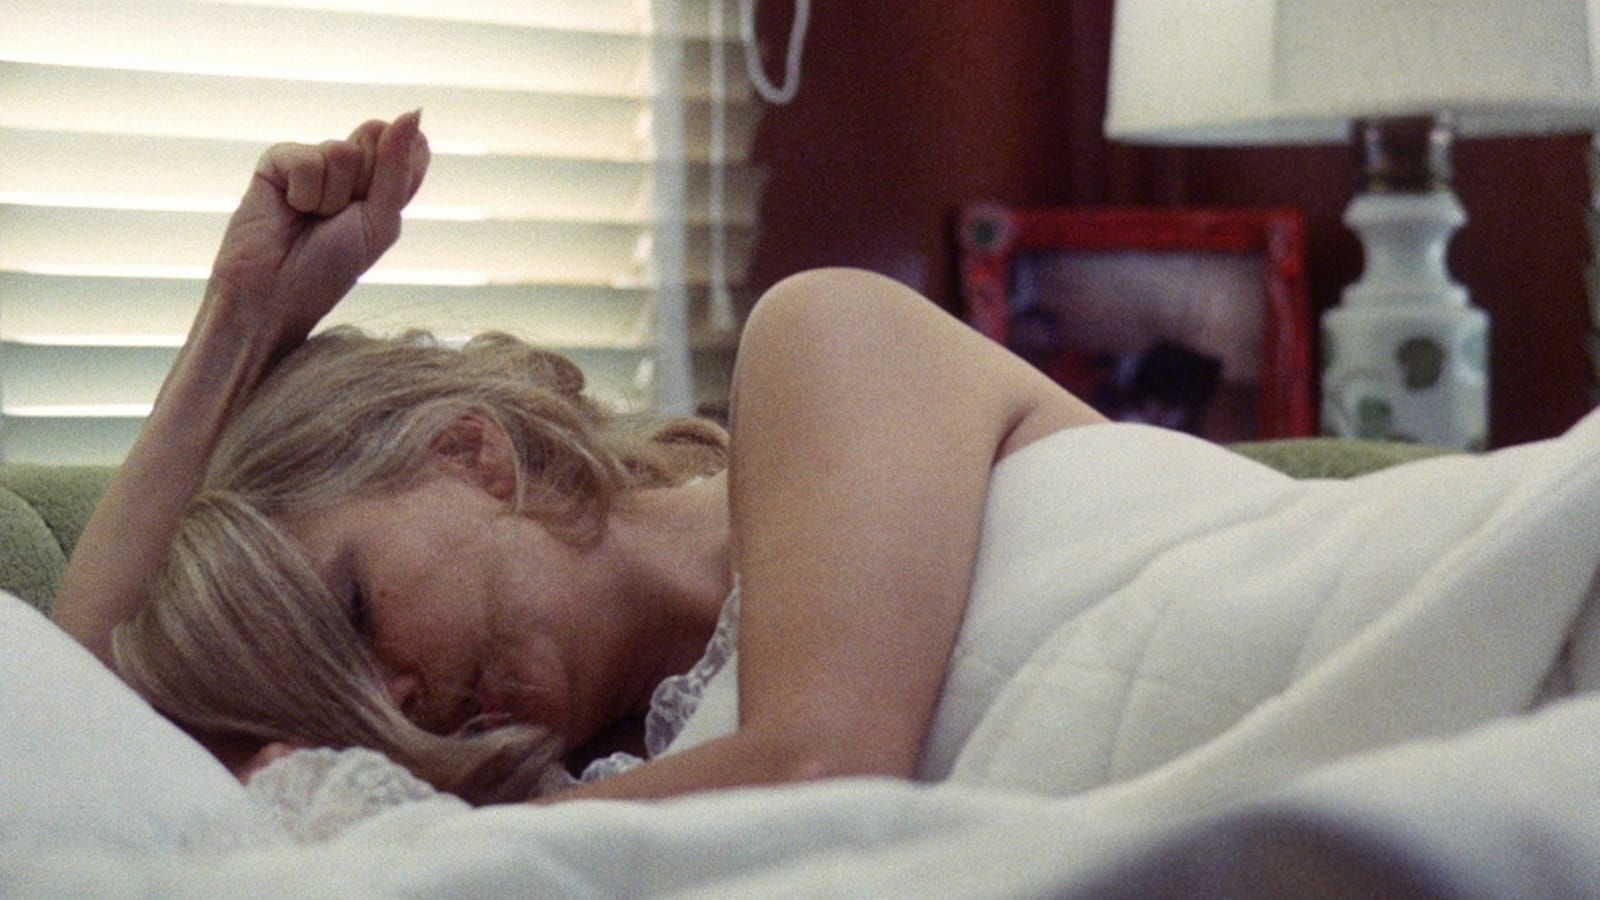 Woman Under the Influence (1974) by John Cassavetes, with Gena